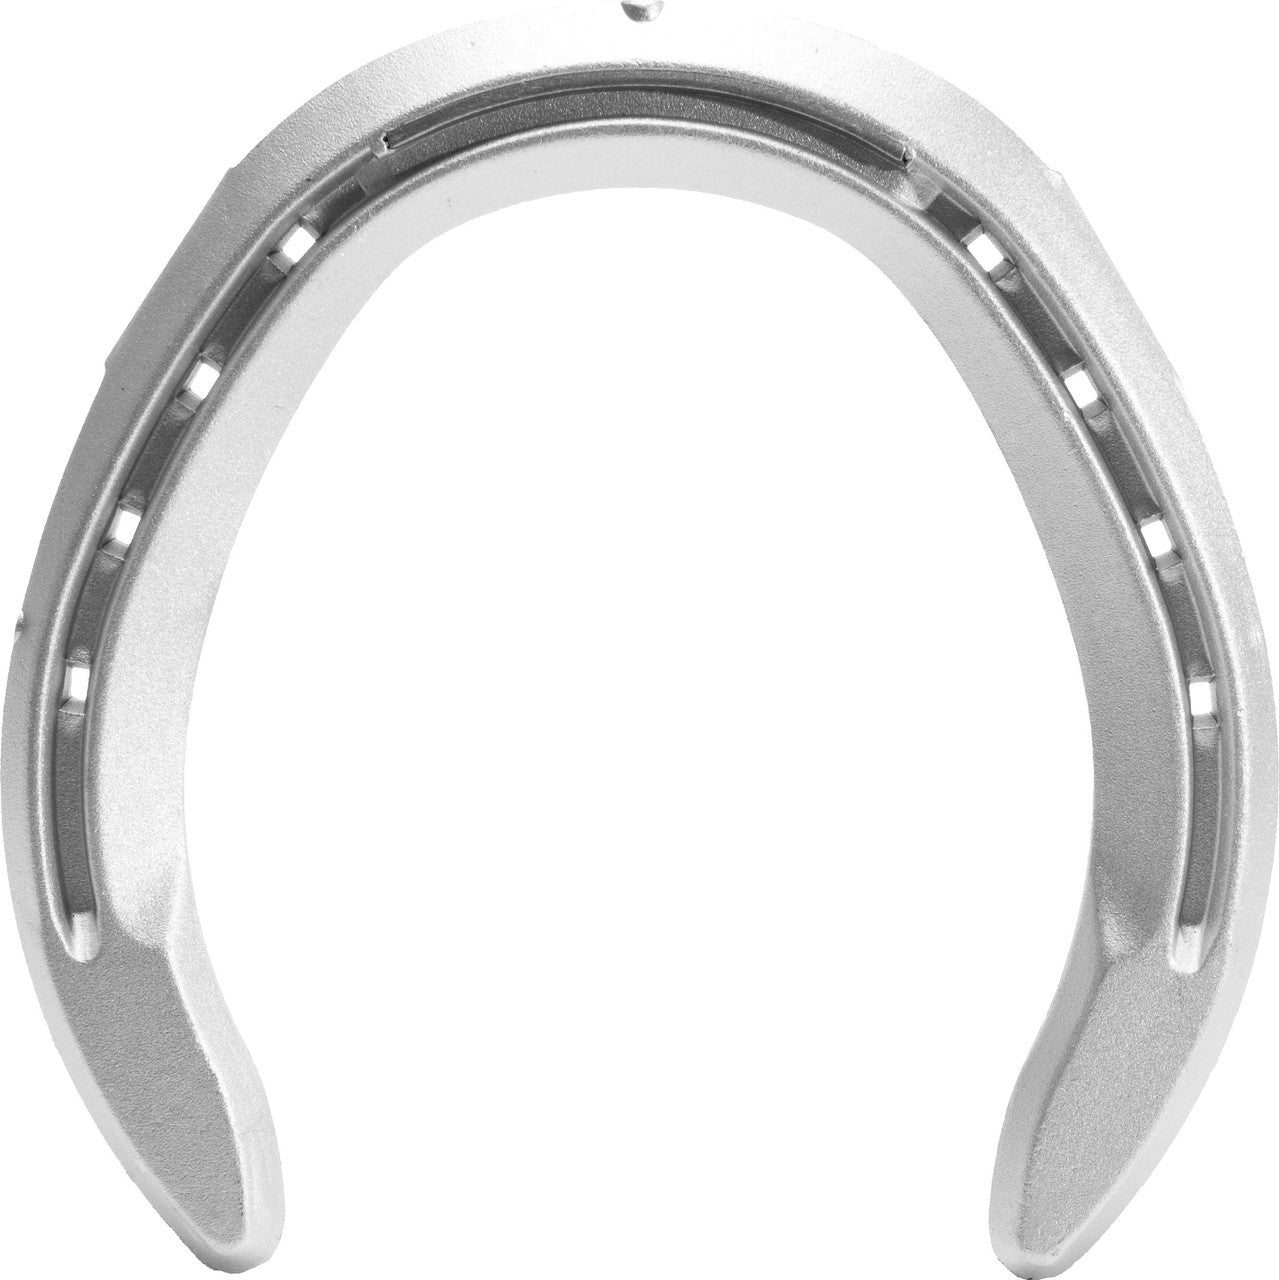 Mustad Eventer Aluminum fronts and hinds